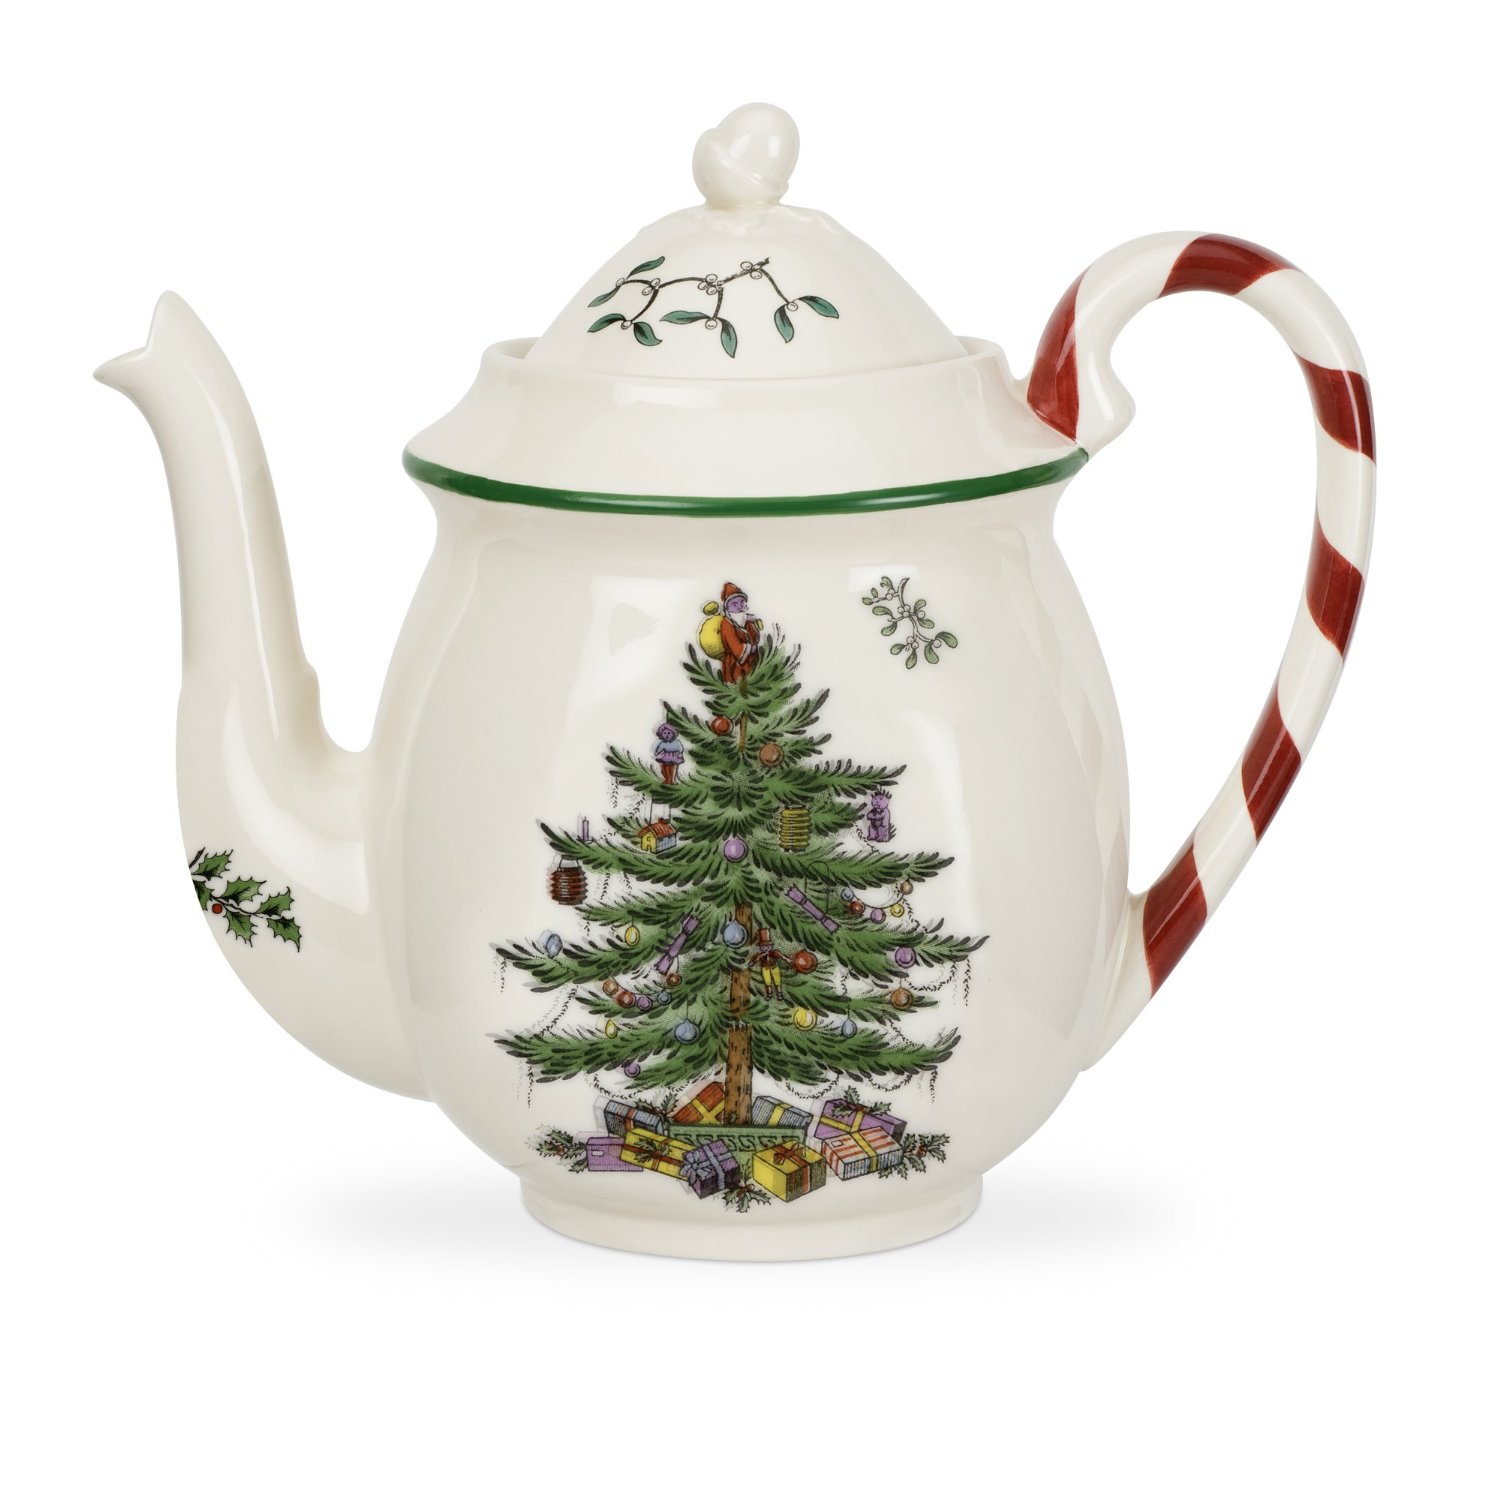 Holidays So Why Not Add In A Special Holiday Teapot Useful For The Big